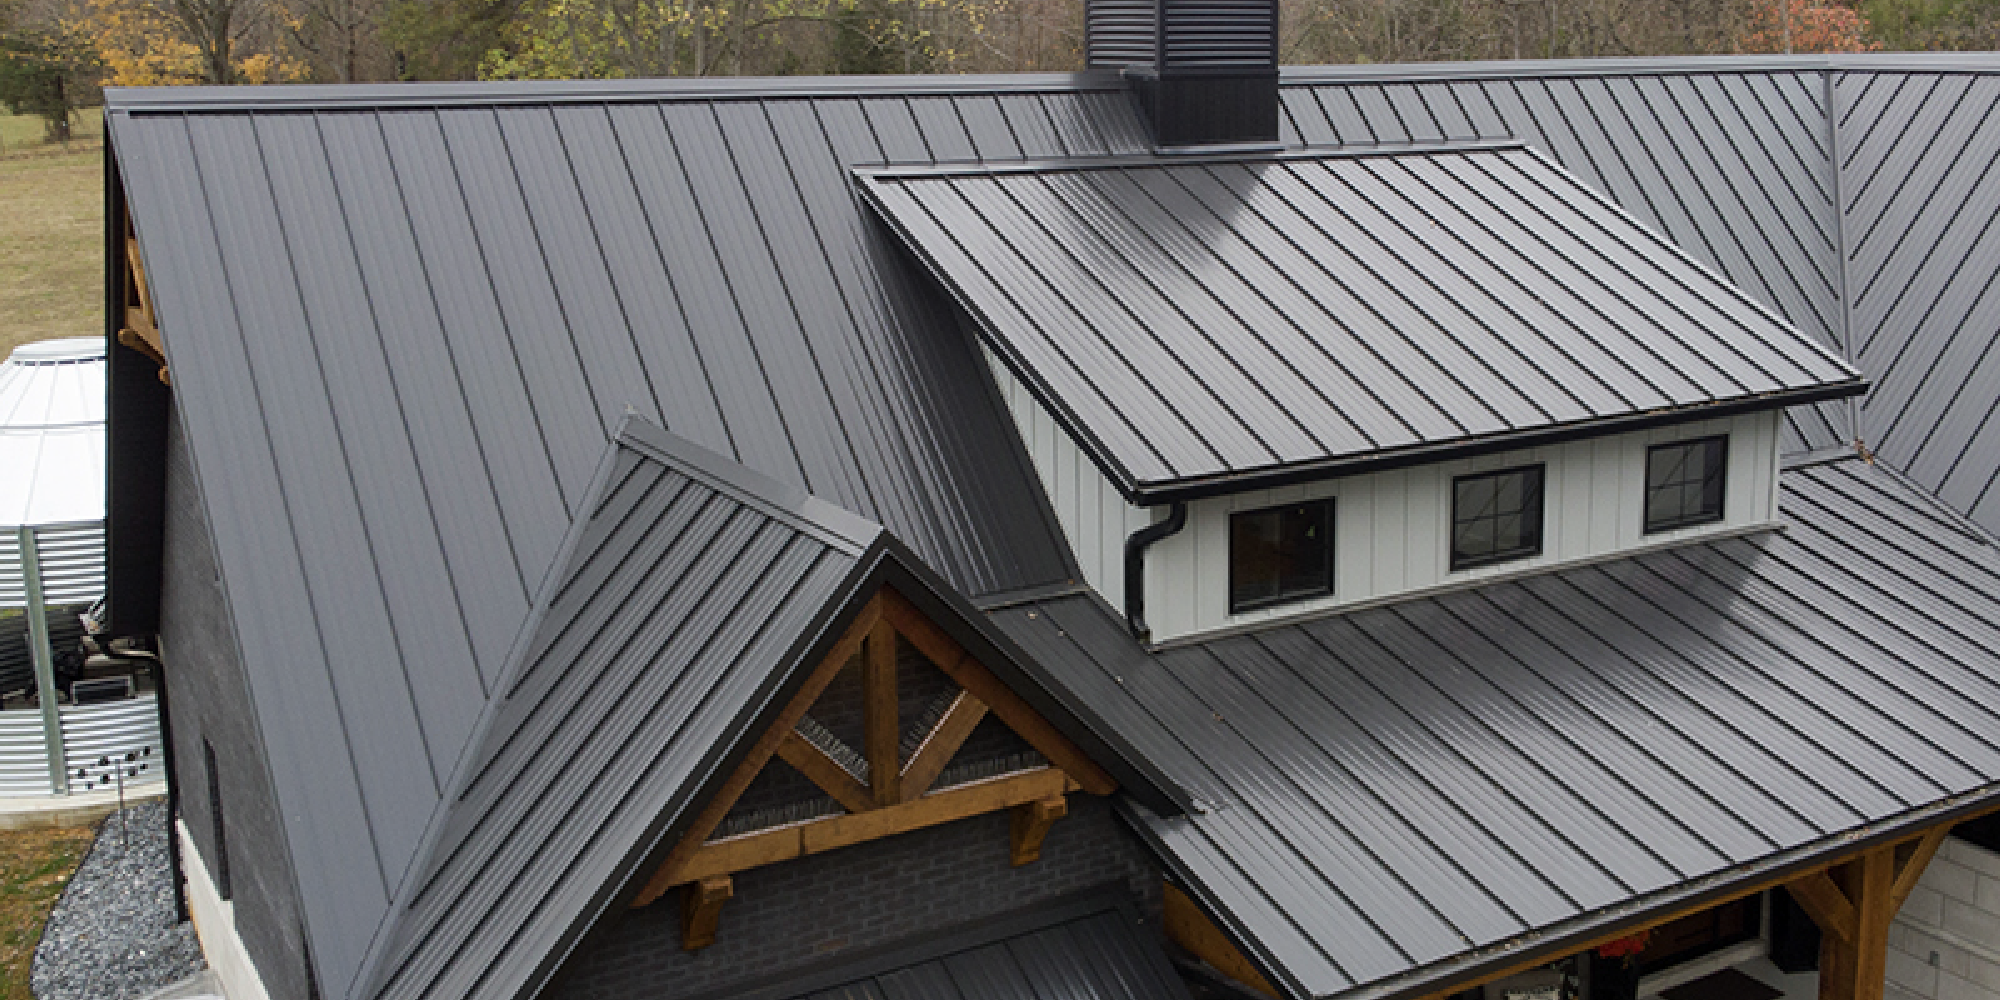 Home with standing seam metal roofing